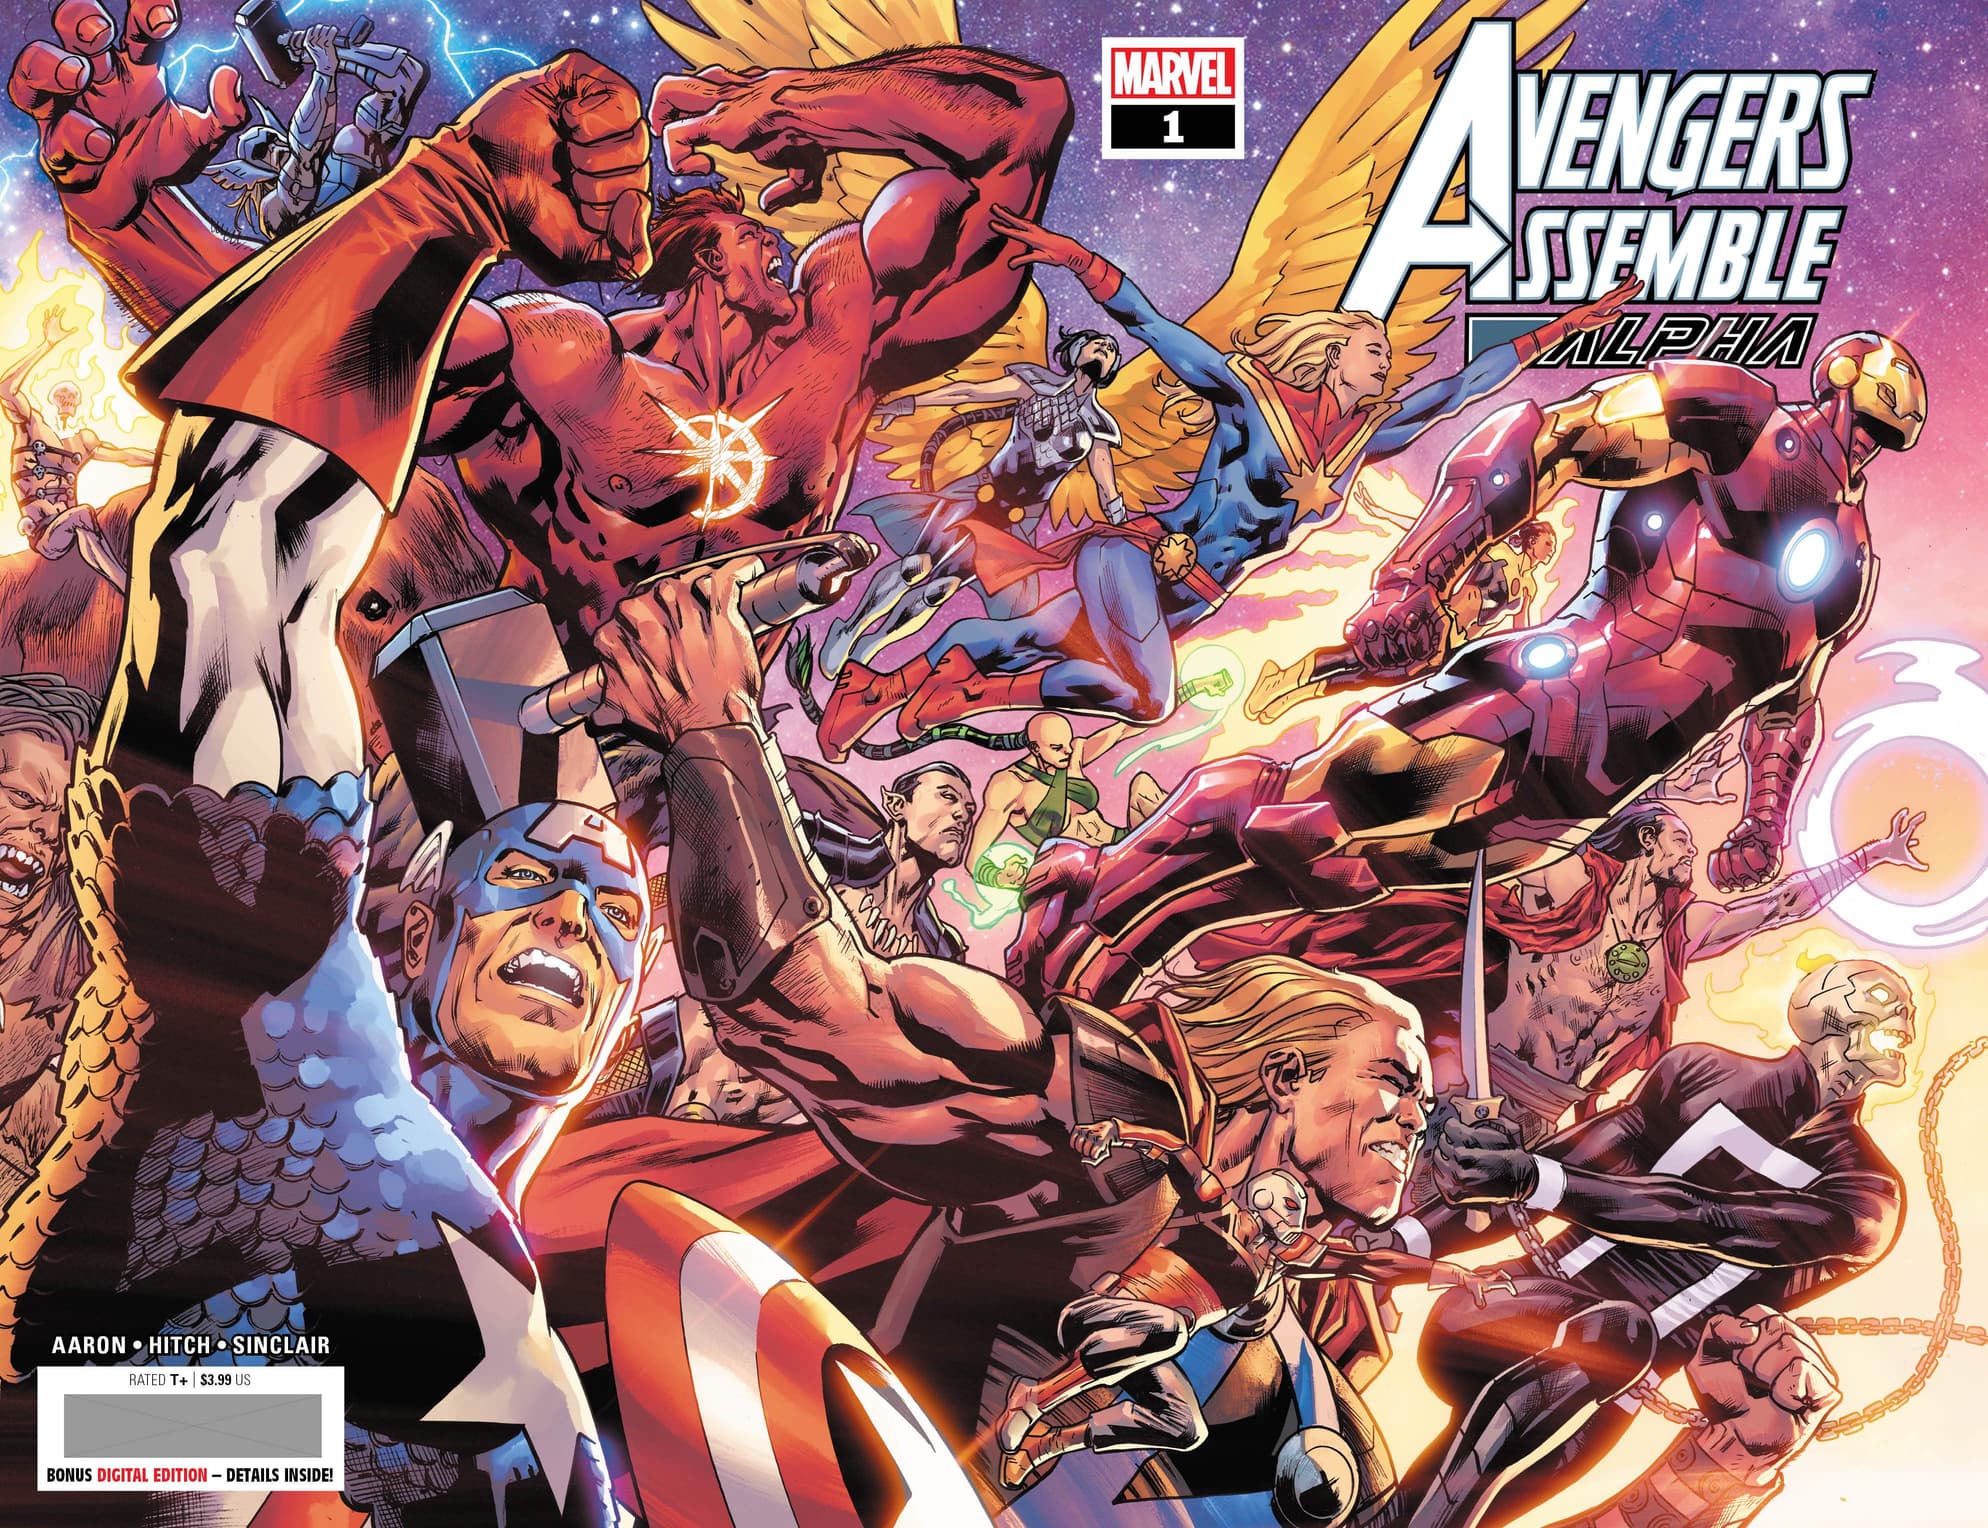 AVENGERS ASSEMBLE ALPHA #1 cover by Bryan Hitch